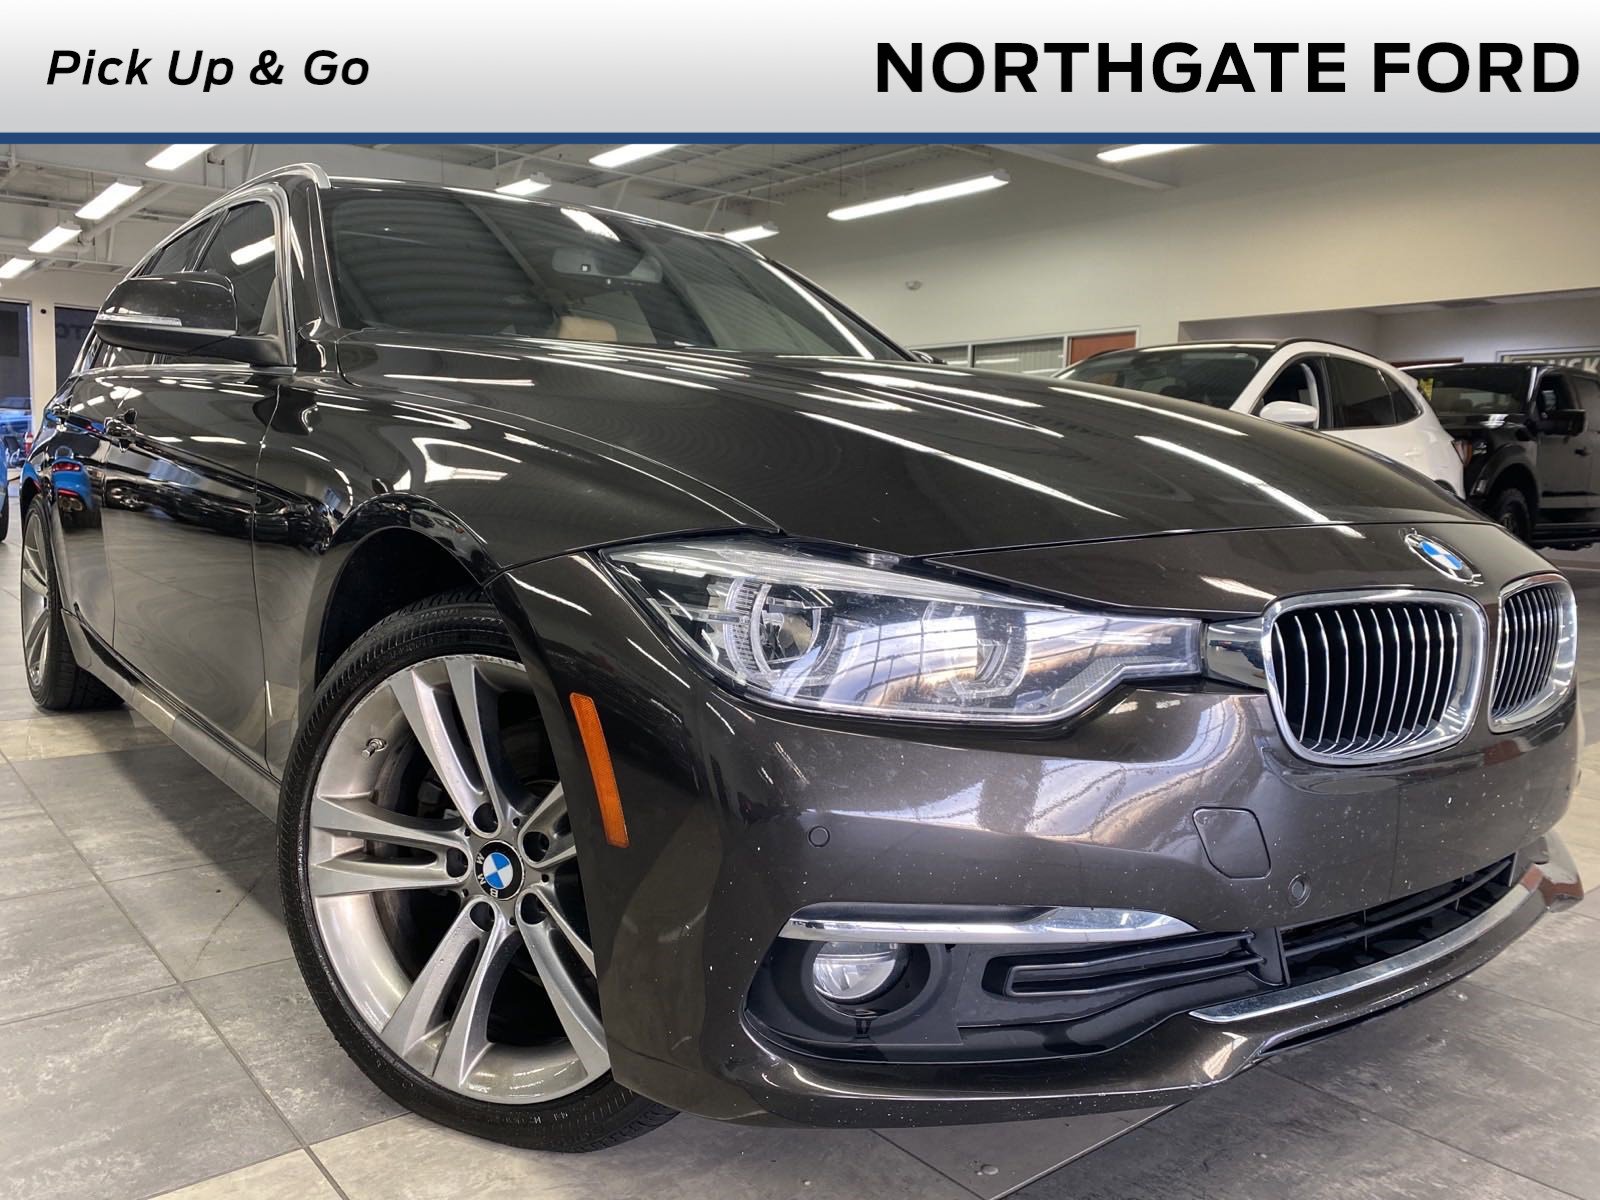 Used 2016 BMW 328d xDrive for Sale Right Now - Autotrader